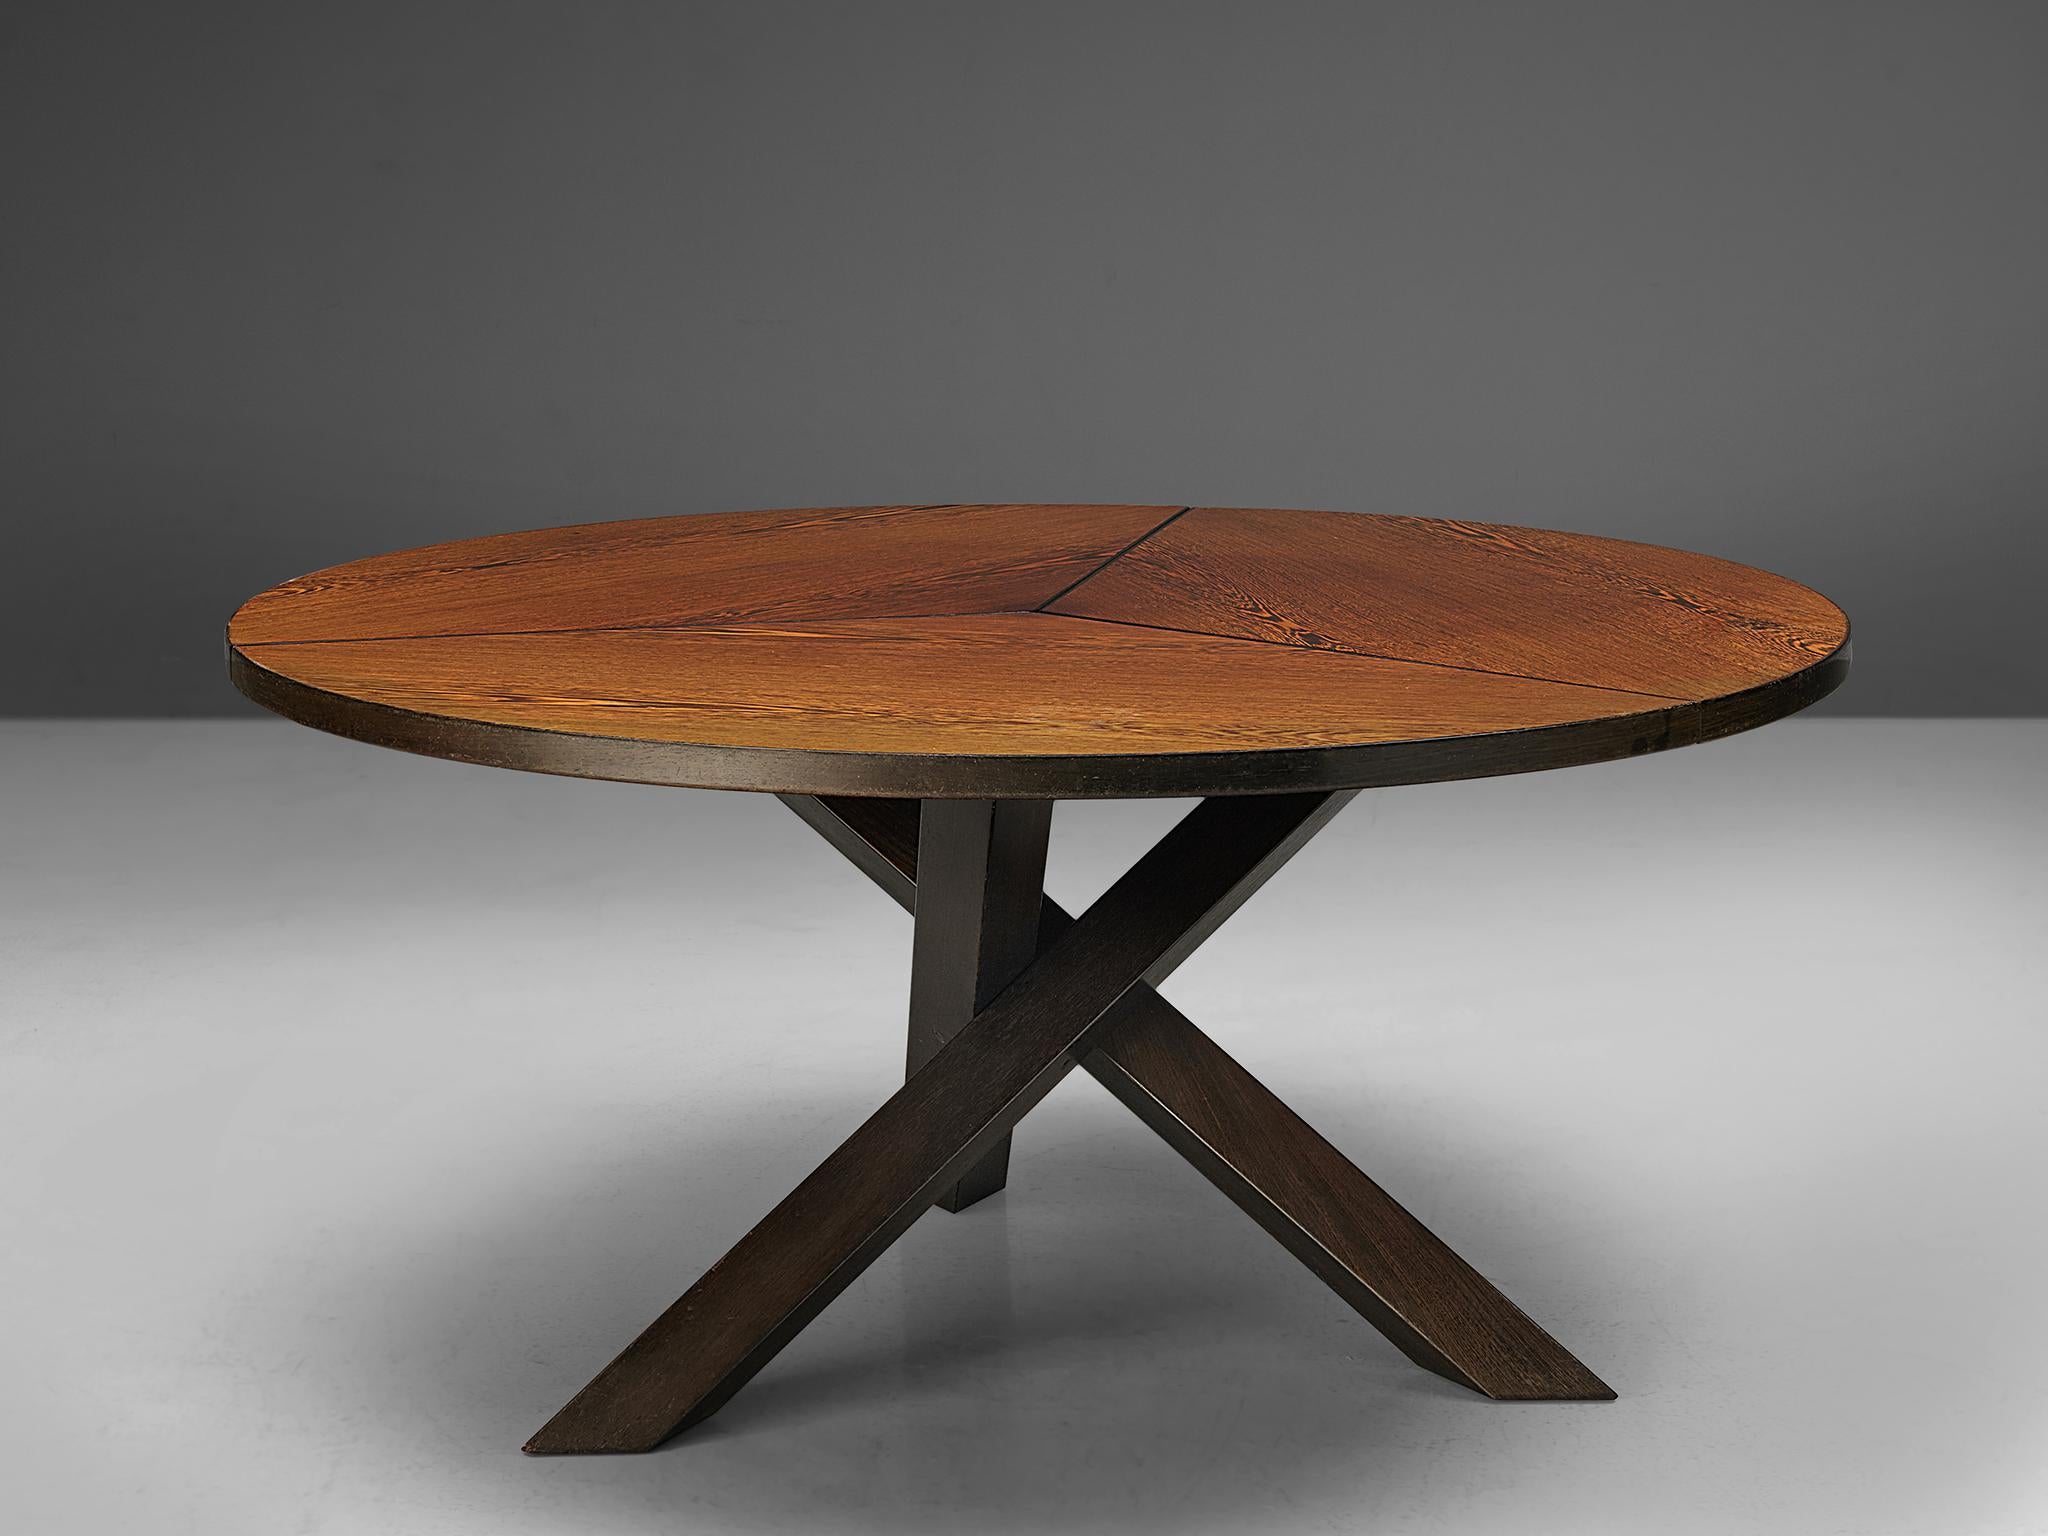 Martin Visser for 't Spectrum, dining table, wengé and wood, the Netherlands, 1960s.

Beautiful wengé dining table with round top, divided into three parts. The base consist of three crossed legs of solid, darkened wood. The veneer top shows an